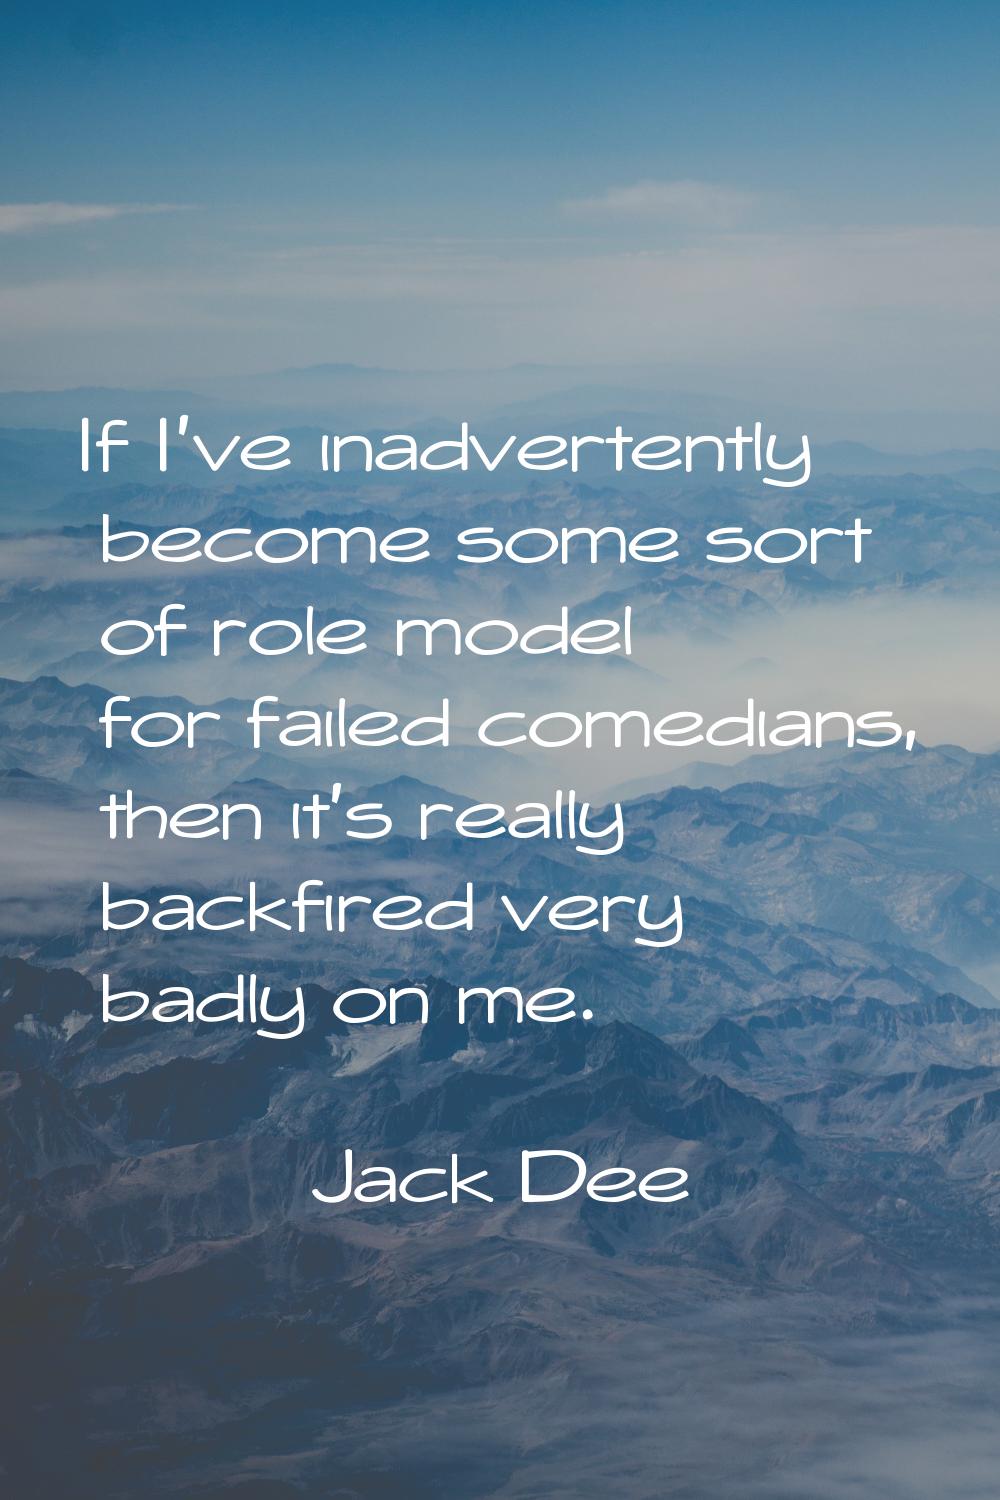 If I've inadvertently become some sort of role model for failed comedians, then it's really backfir